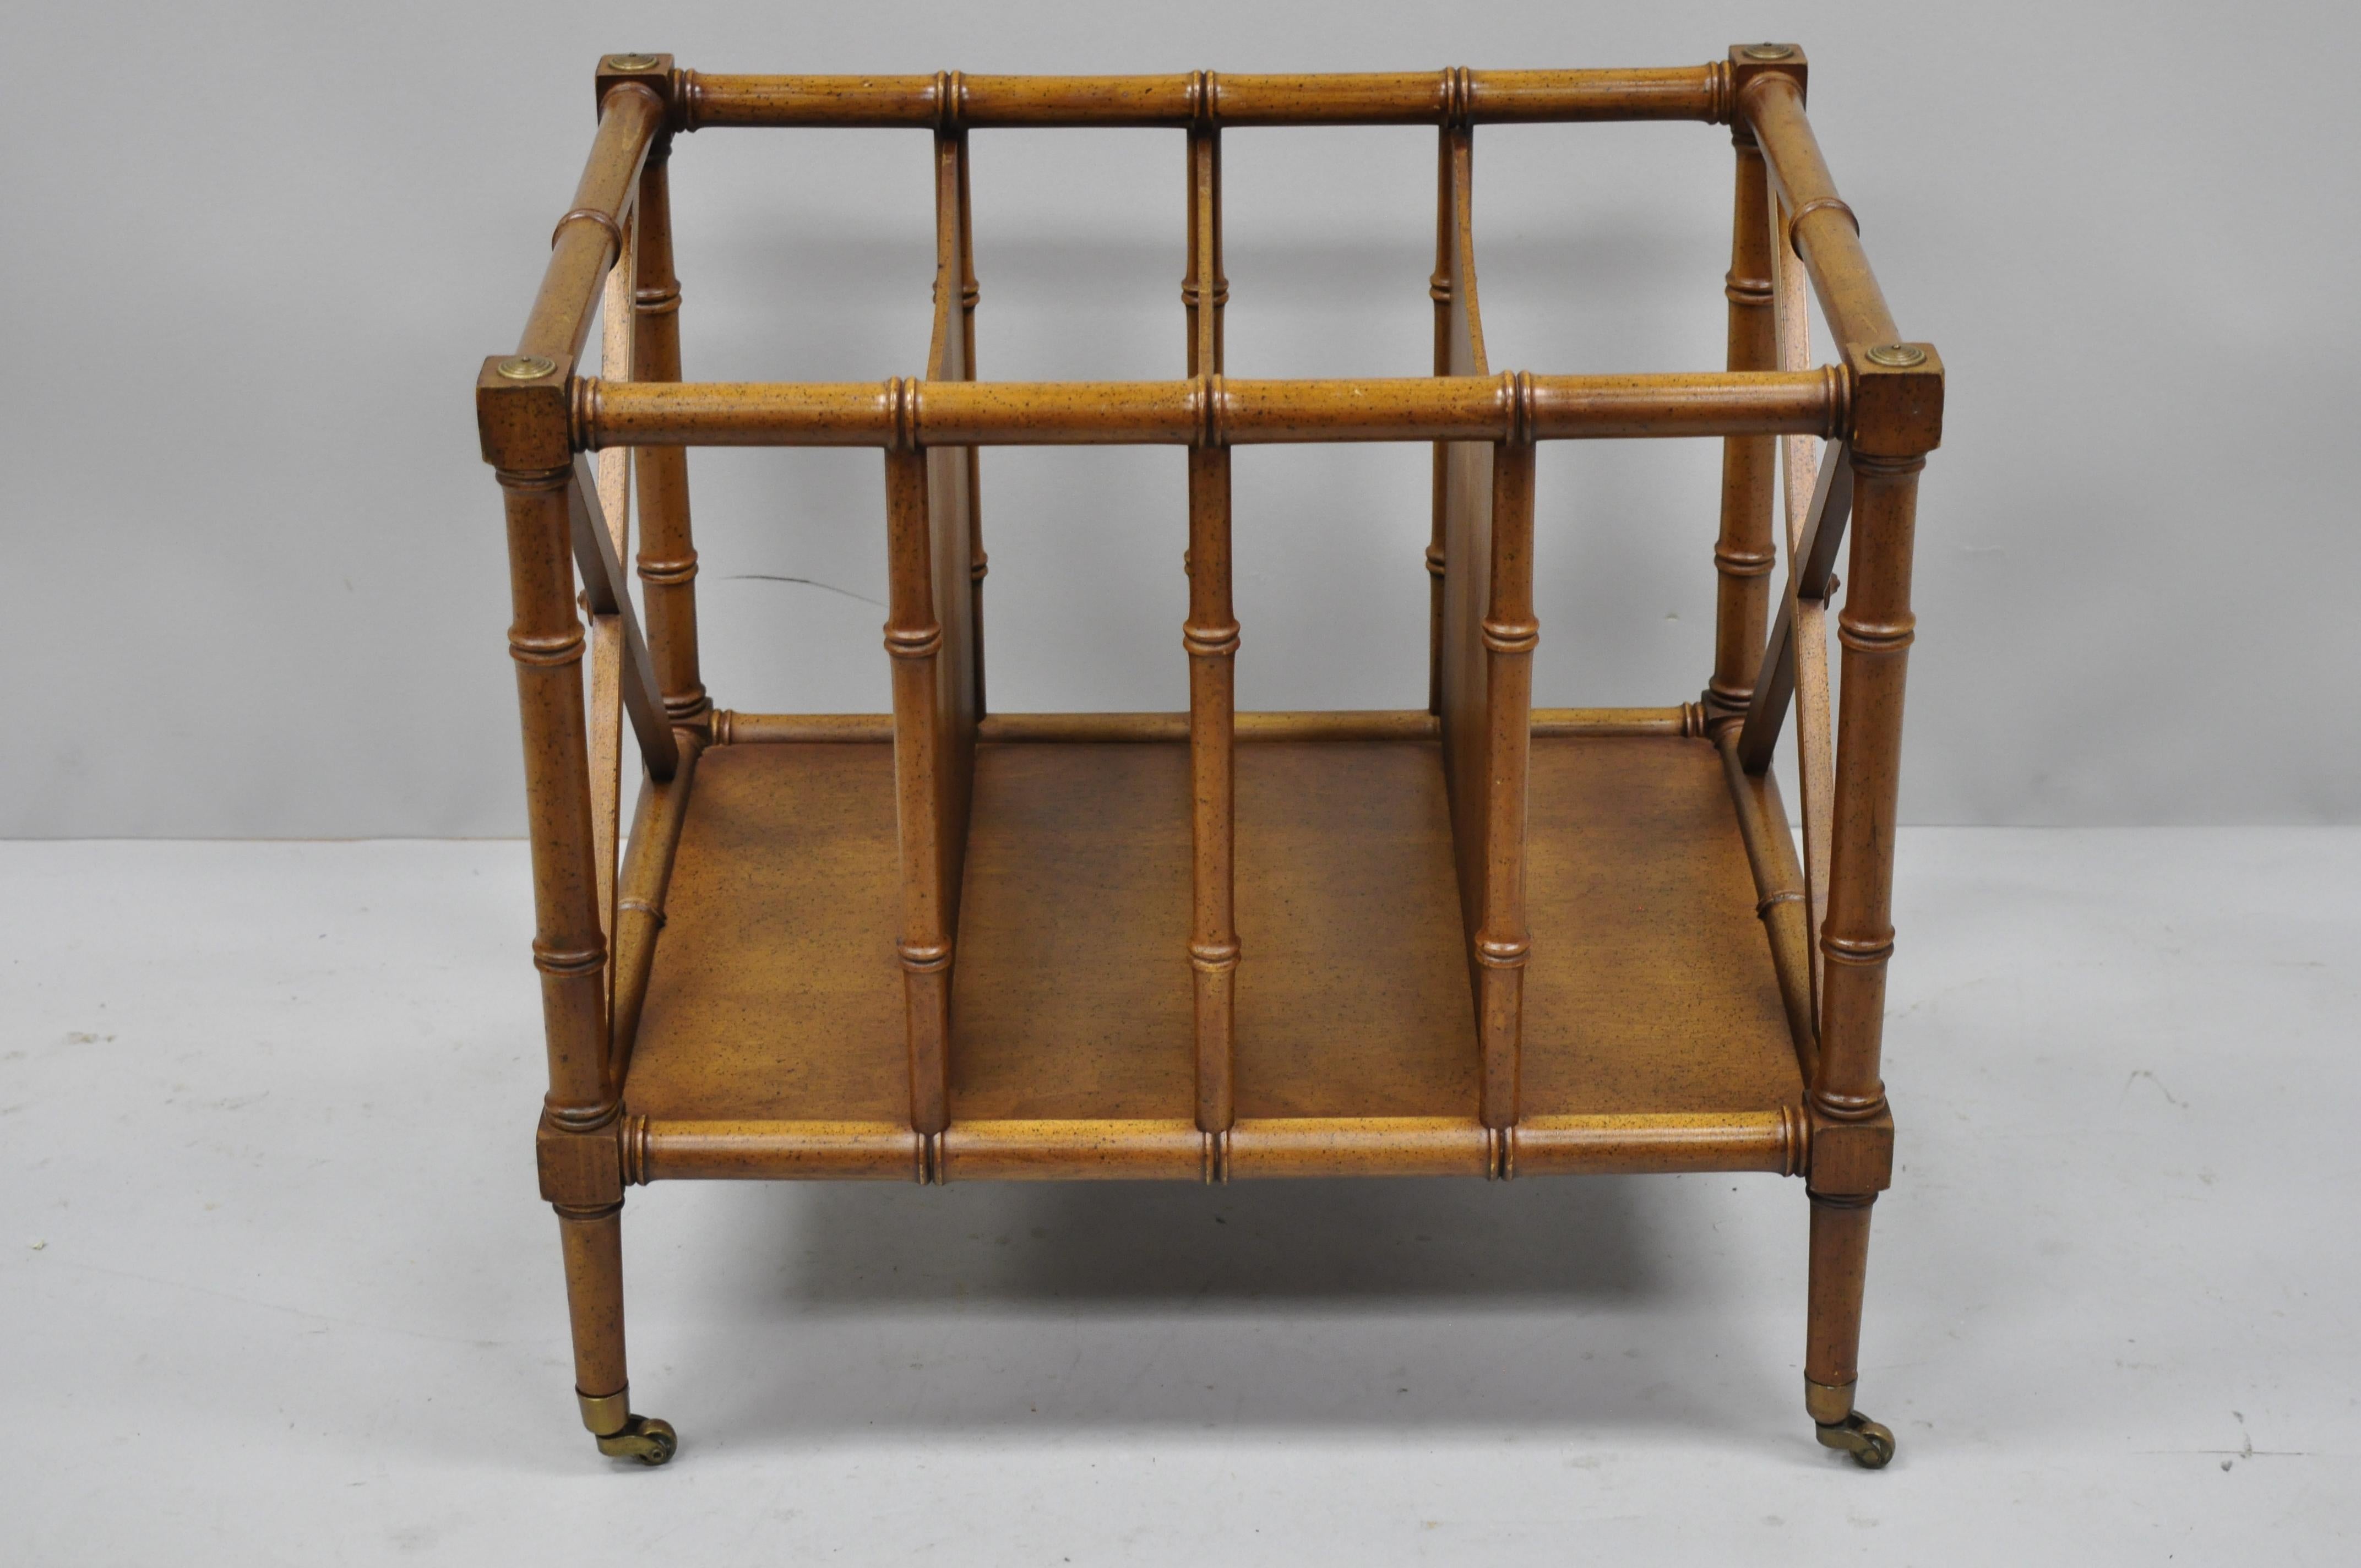 Vintage Hollywood Regency faux bamboo Canterbury magazine rack medallion limited. Item features brass rolling casters, X-form sides, wood construction, original label, great style and form, circa mid-late 20th century. Measurements: 19